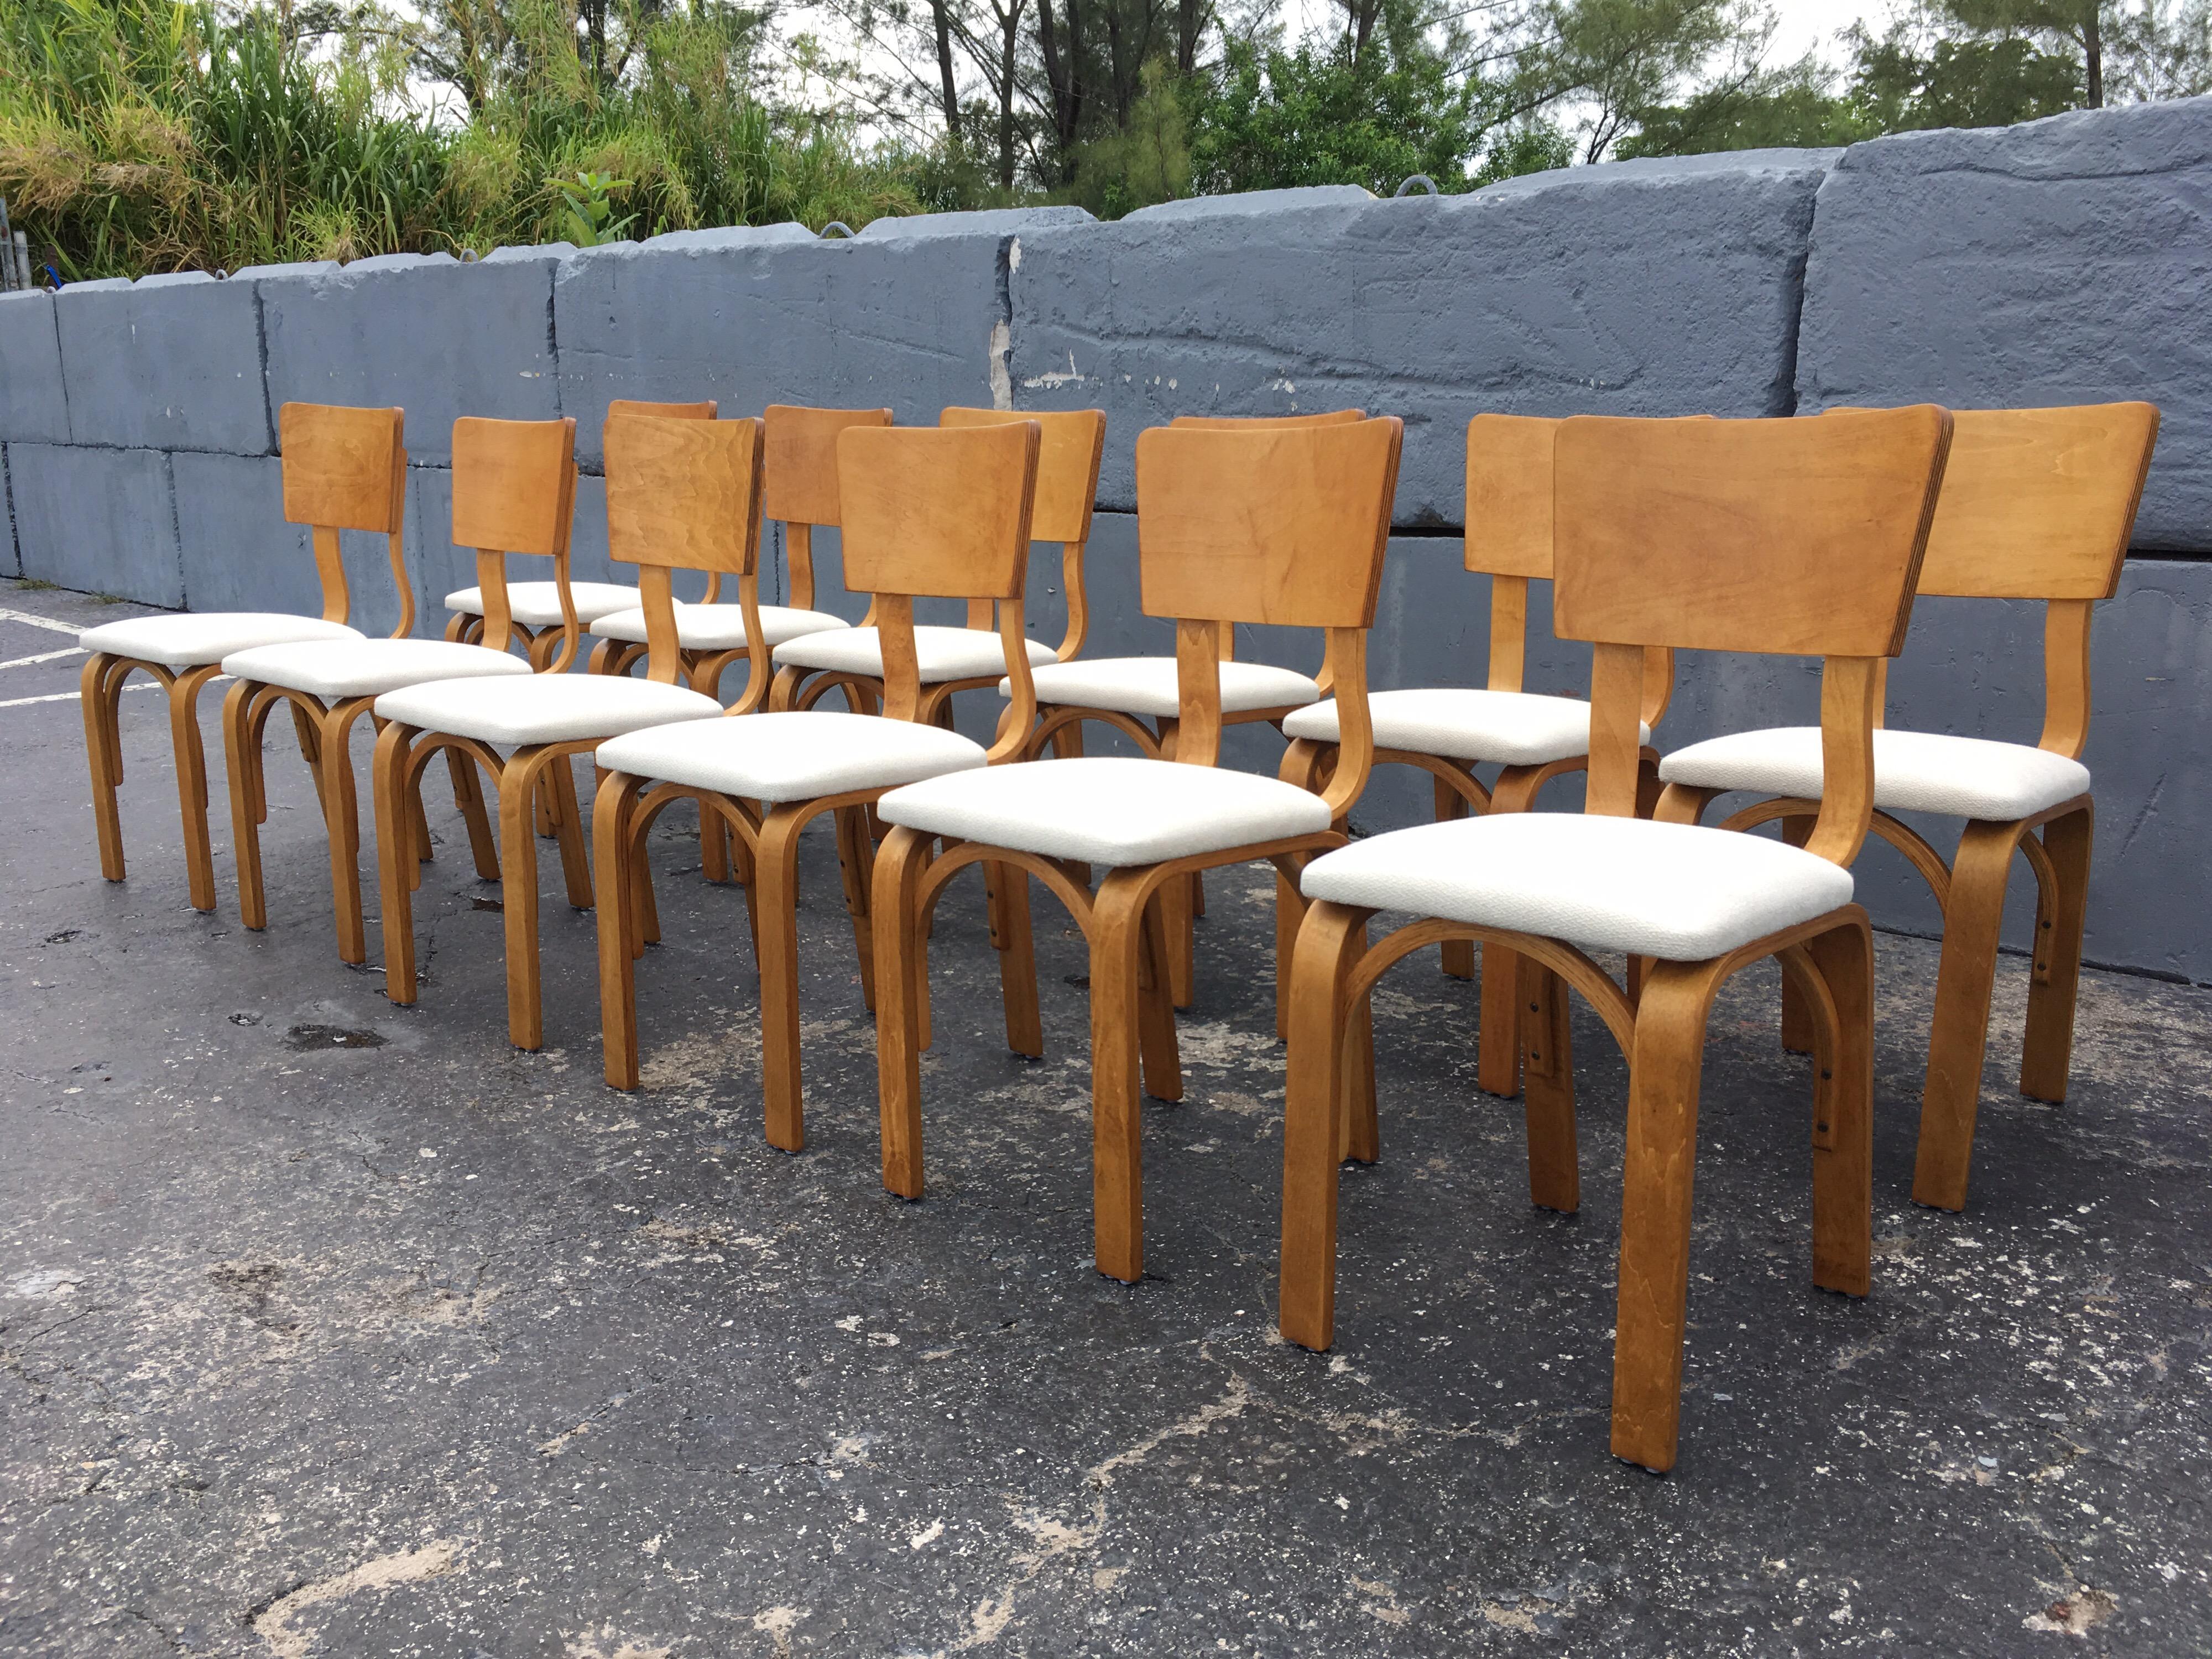 Set of ten Thonet dining chairs in great condition, bentwood and fabric. Ready for a new home, listing is for ten chairs.